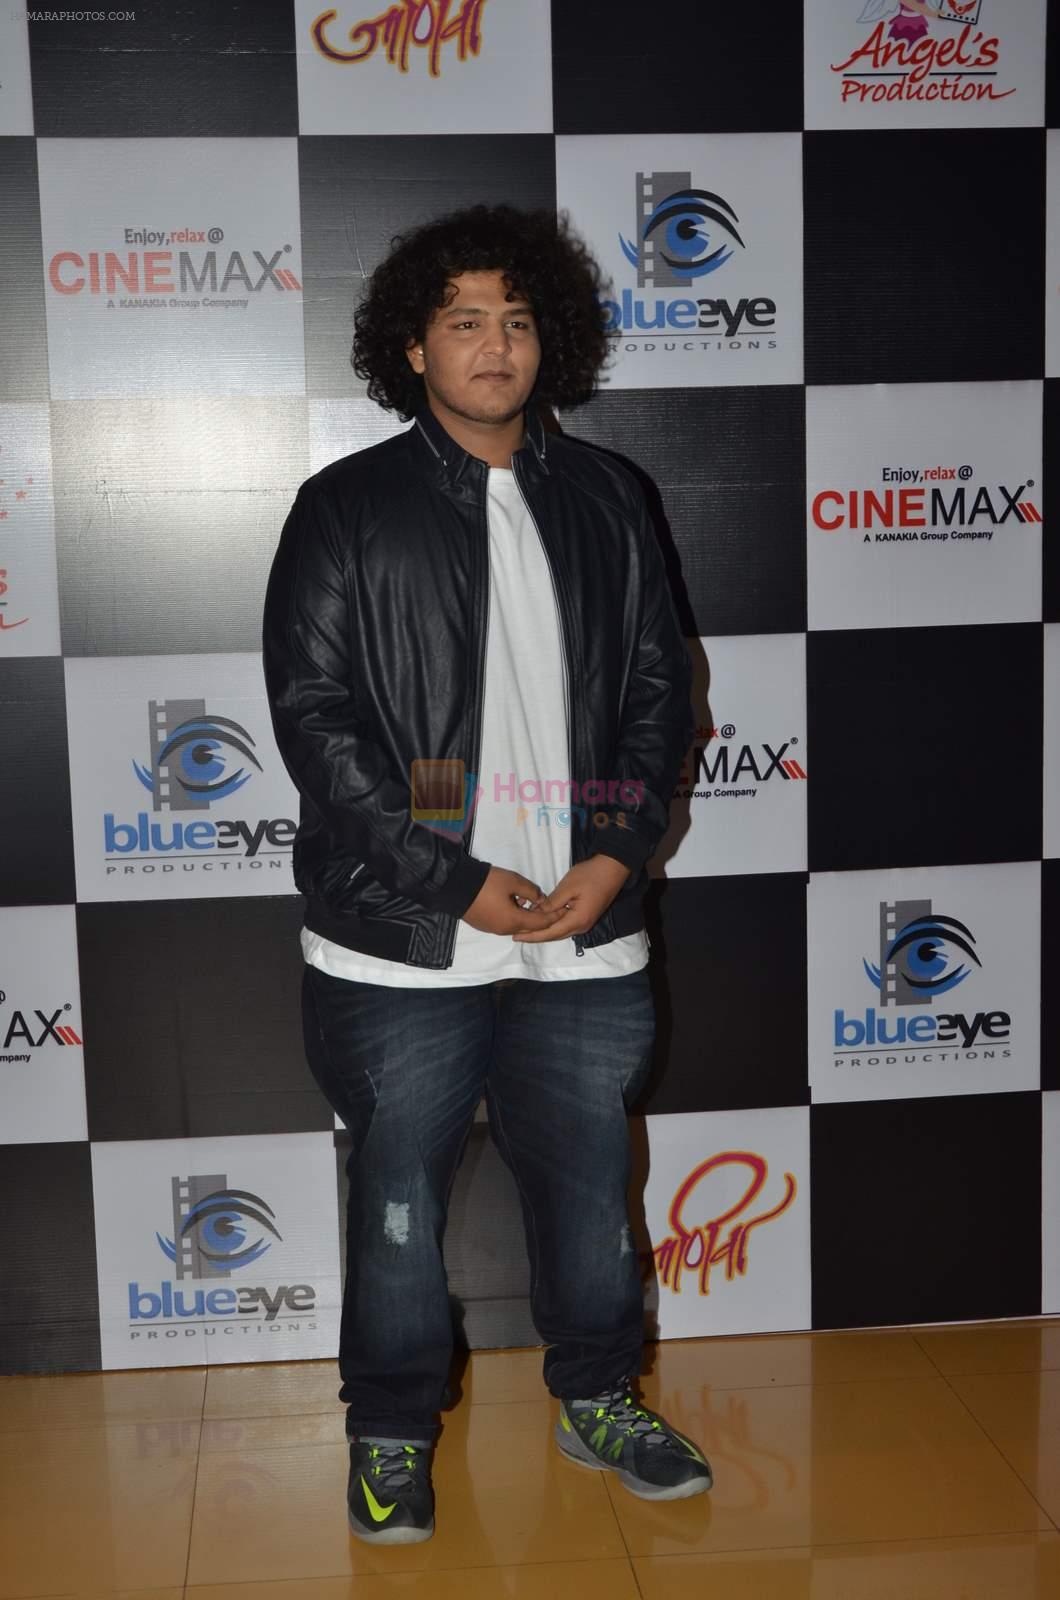 at the Screening of Marathi film Jaaniva in Cinemax on 29th July 2015